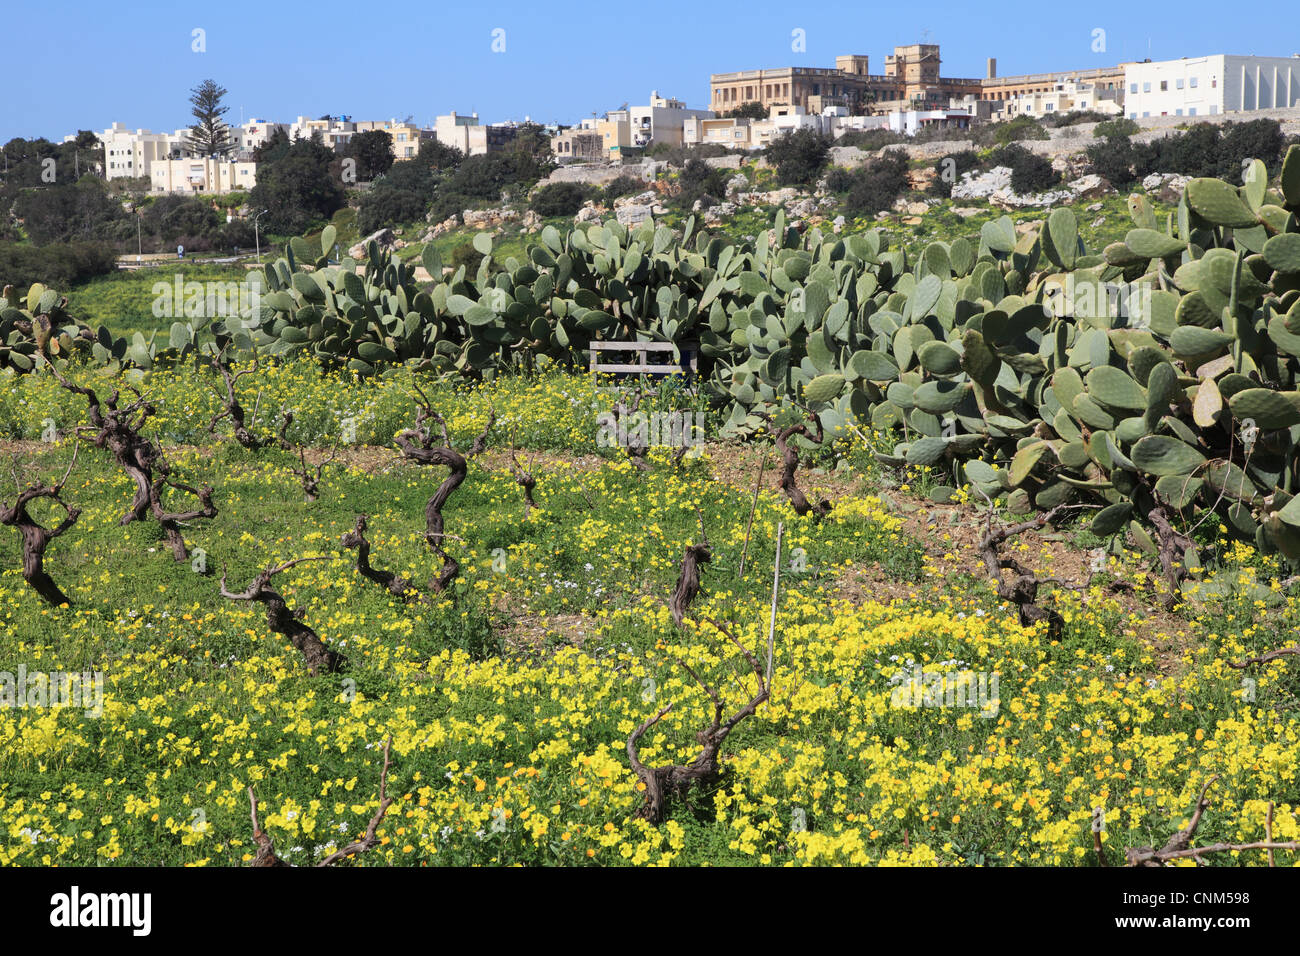 Old vineyard with yellow spring flowers and cactus, town of Rabat in the background, Malta, Europe Stock Photo